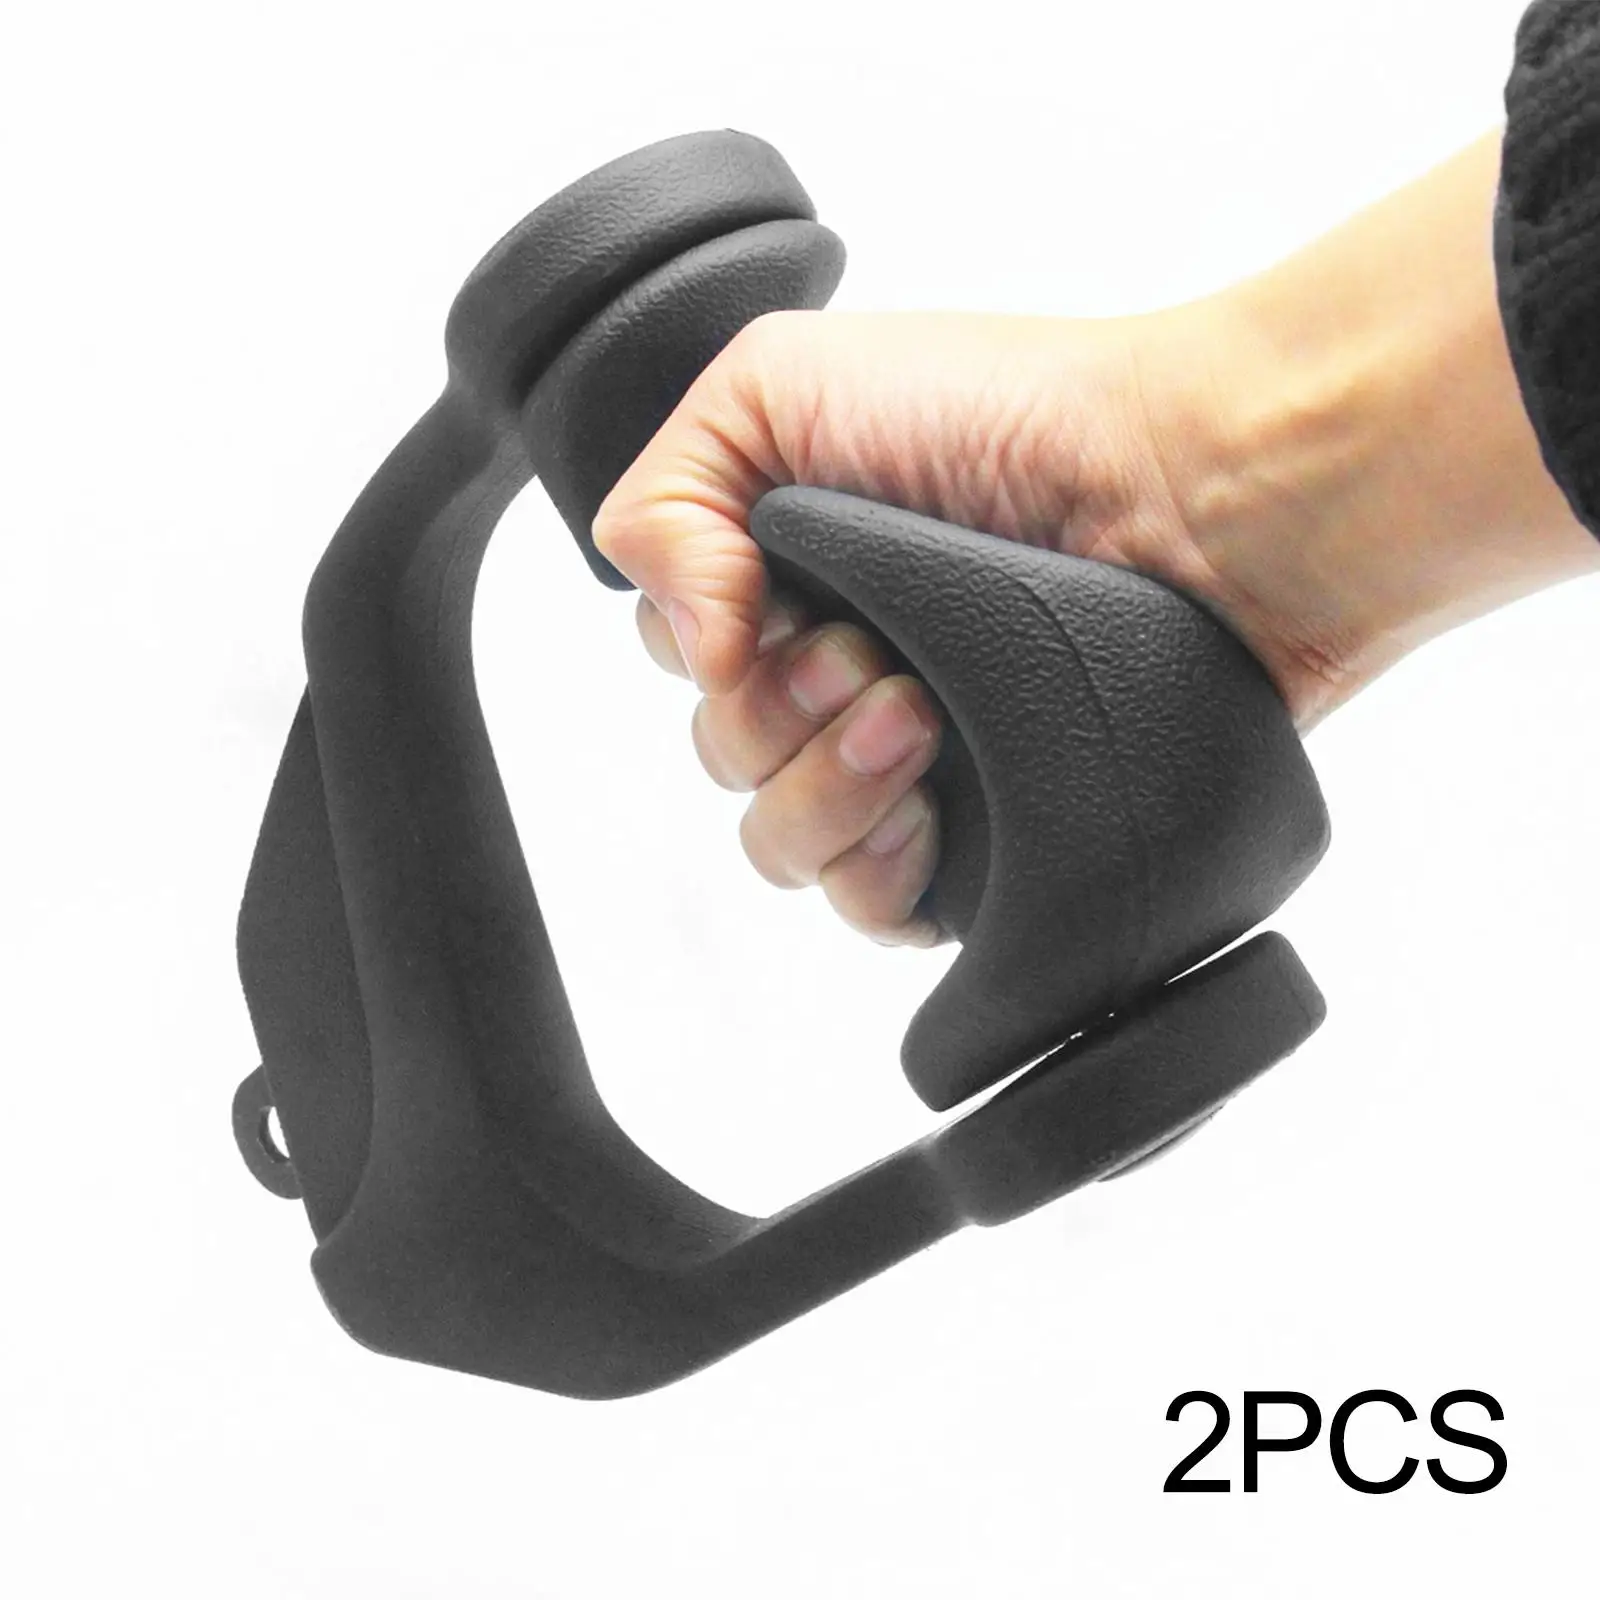 Tricep Hand Grip Sports Equipment Workout Comfortable Attachment LAT Pull Down Rowing Bar